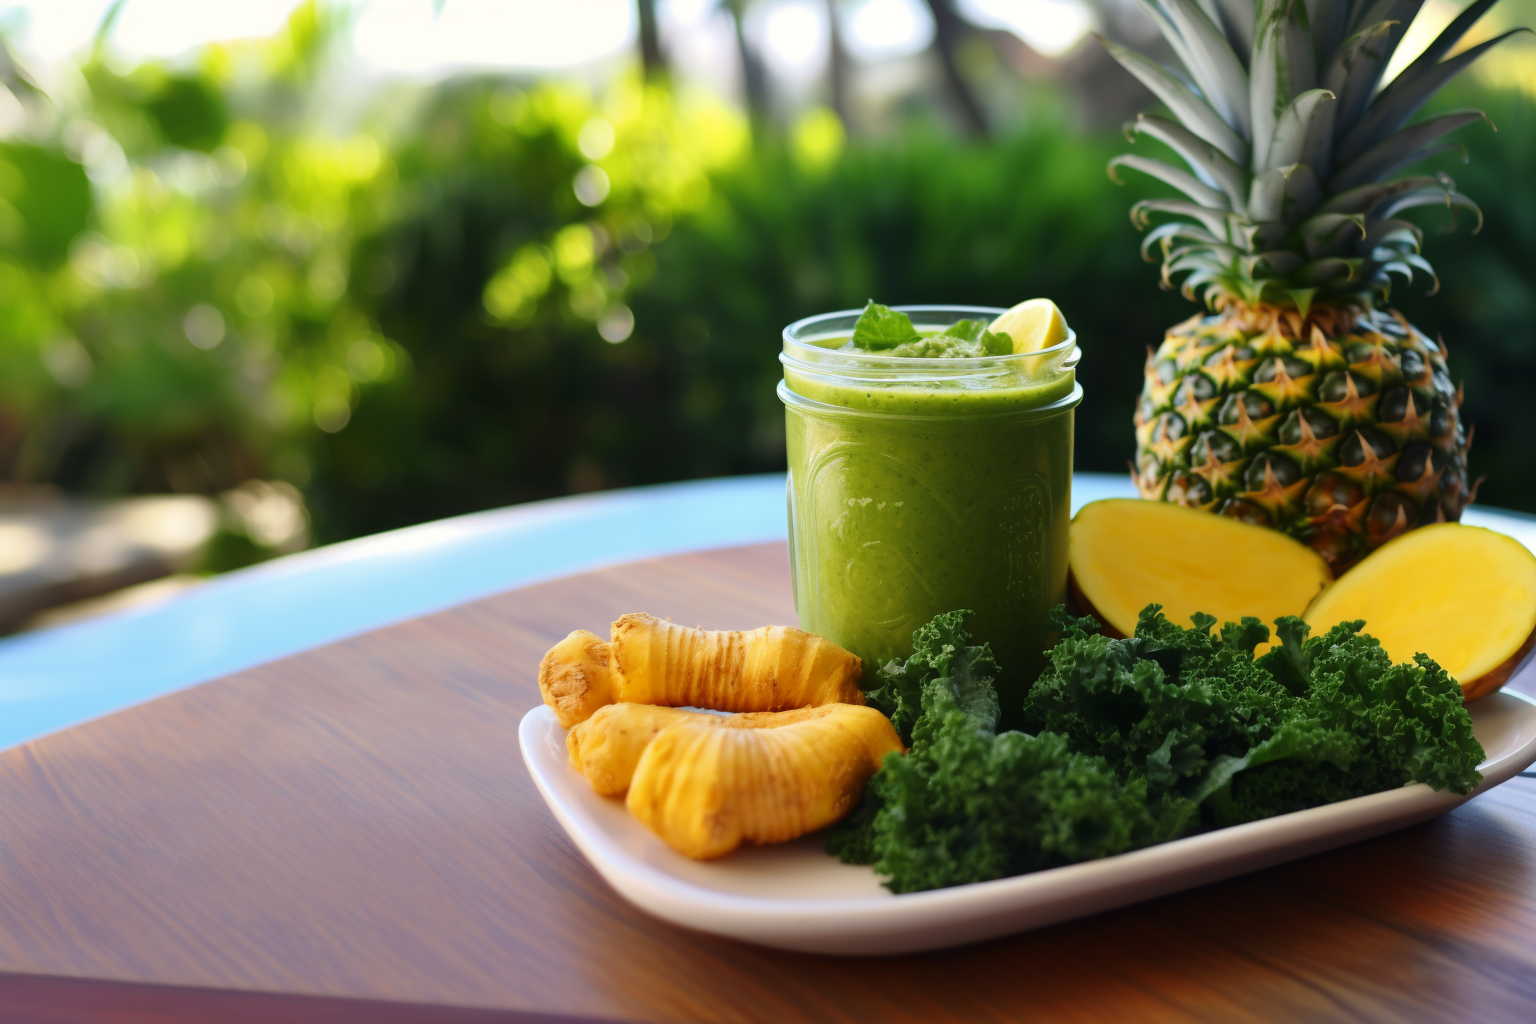 A Rewind tropical turmeric twist smoothie surrounded by its key ingredients pineapple, mango, turmeric, and kale arranged neatly on a plate on an outdoor table